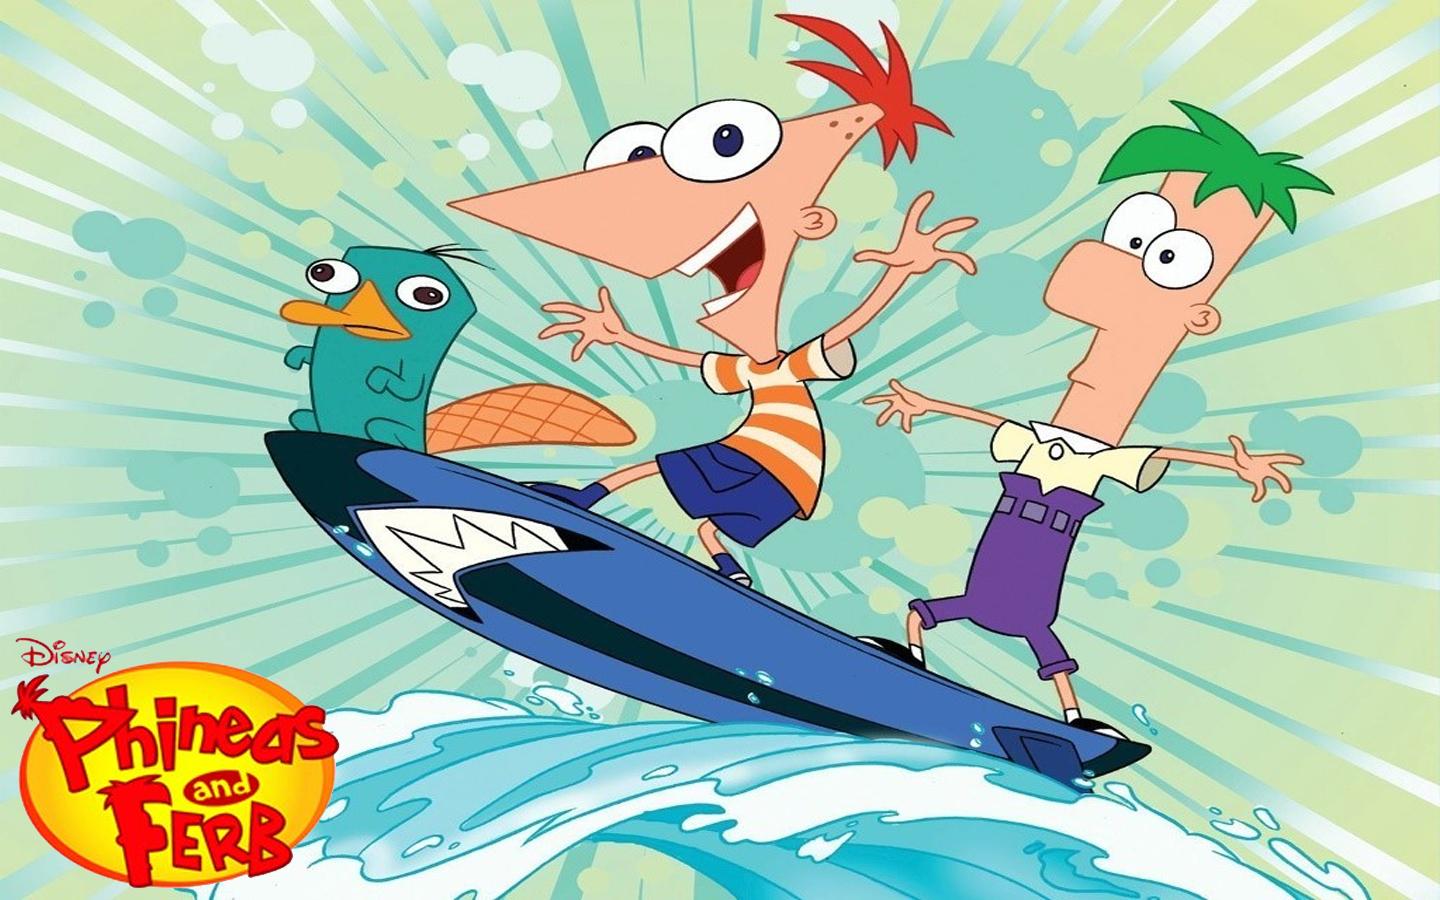 Phineas and Ferb Wallpaper for Desktop